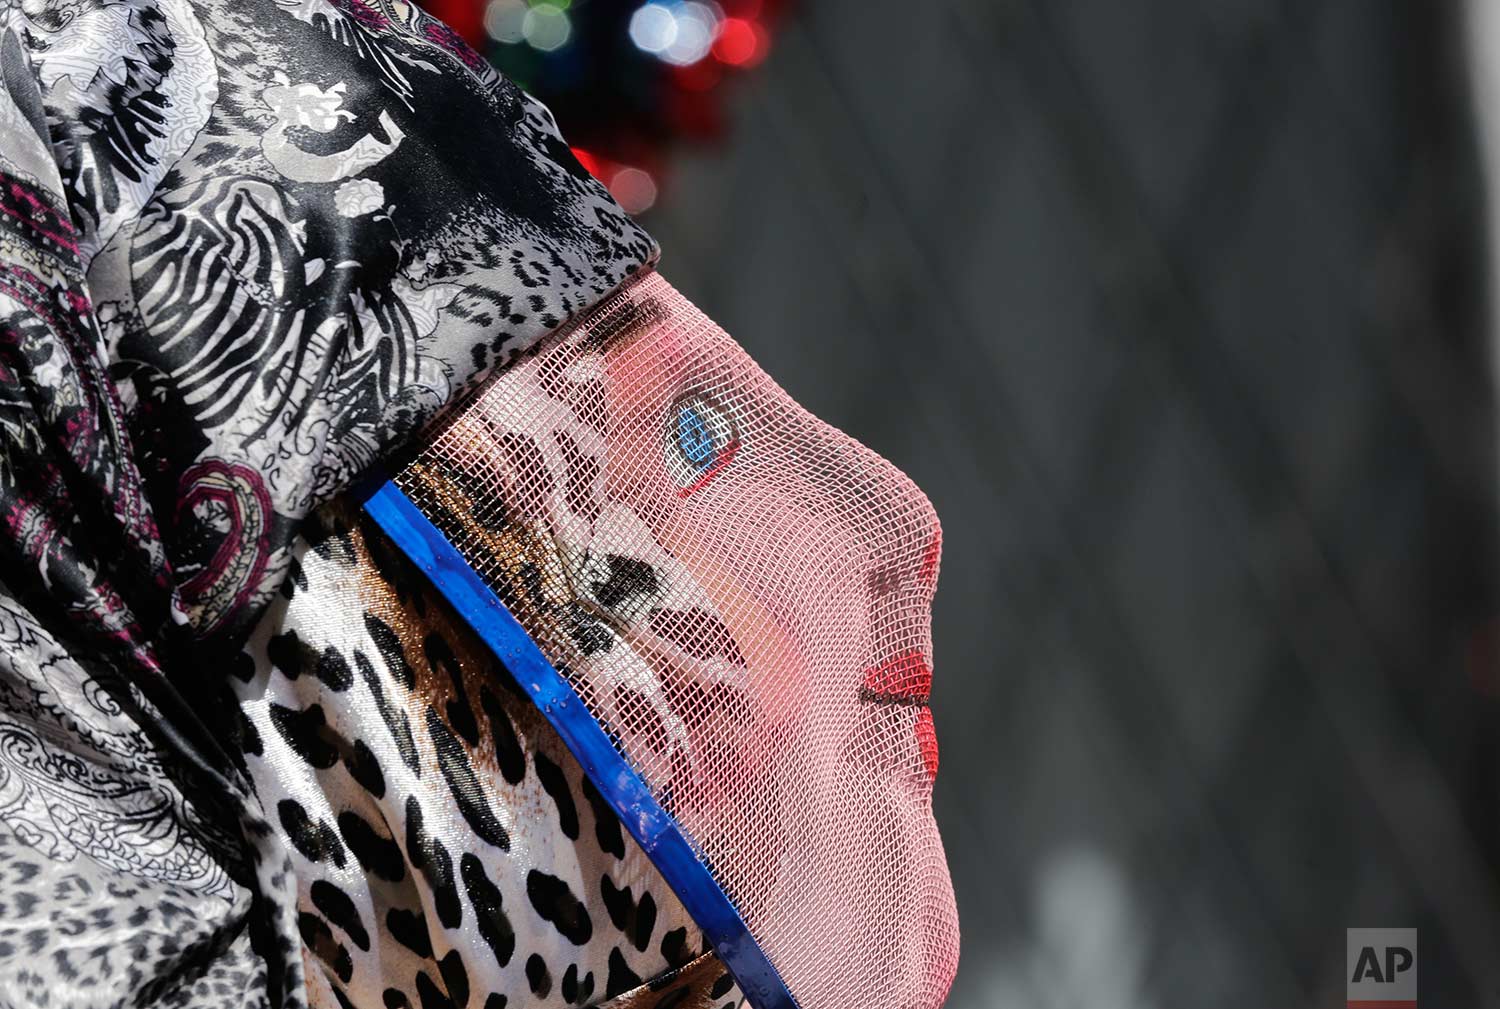  A person dons a wire mesh mask representing the more affluent during the traditional New Year's festival known as "La Diablada", in Pillaro, Ecuador, Friday, Jan. 5, 2018. (AP Photo/Dolores Ochoa) 